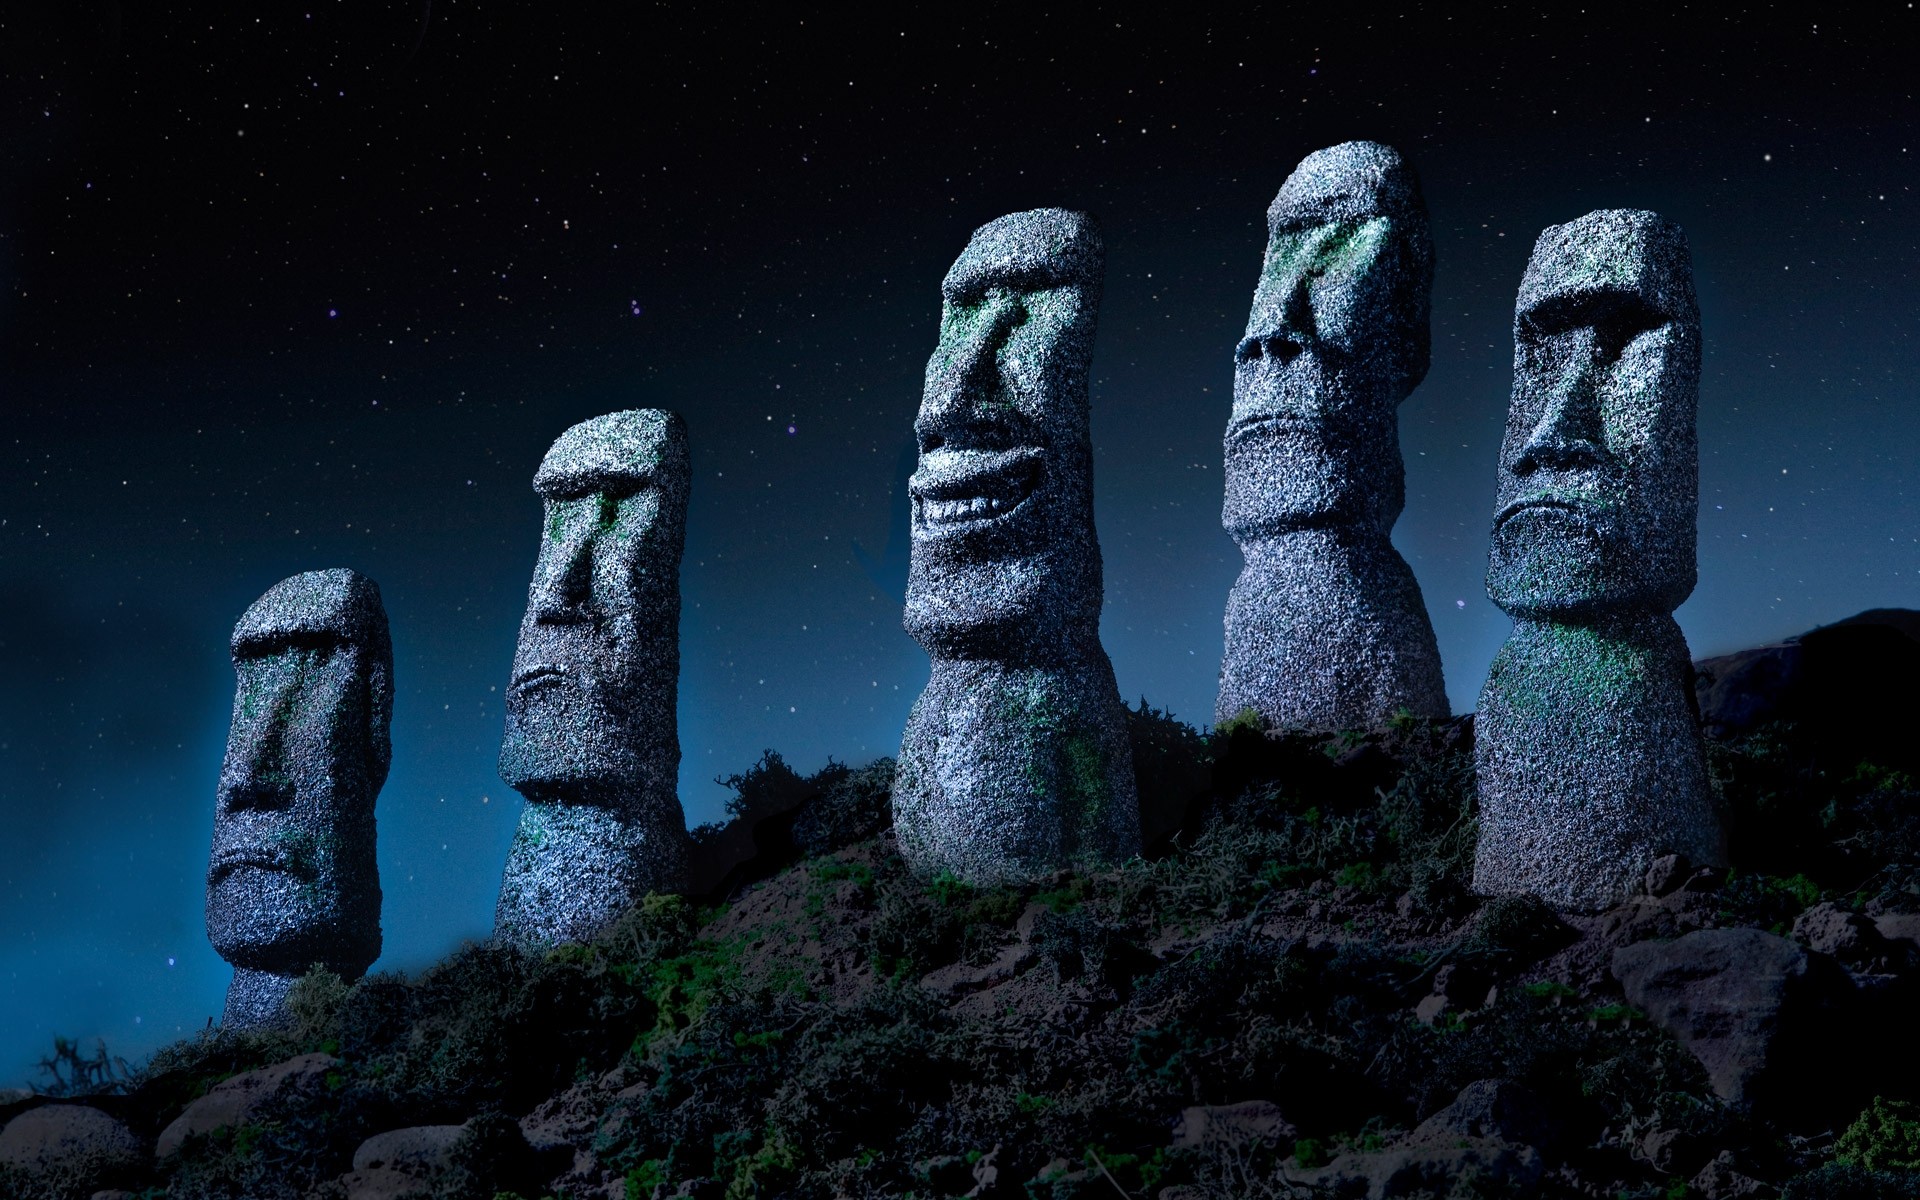 General 1920x1200 Easter Island Chile starry night statue Moai giant stones monuments nature humor landmark World Heritage Site